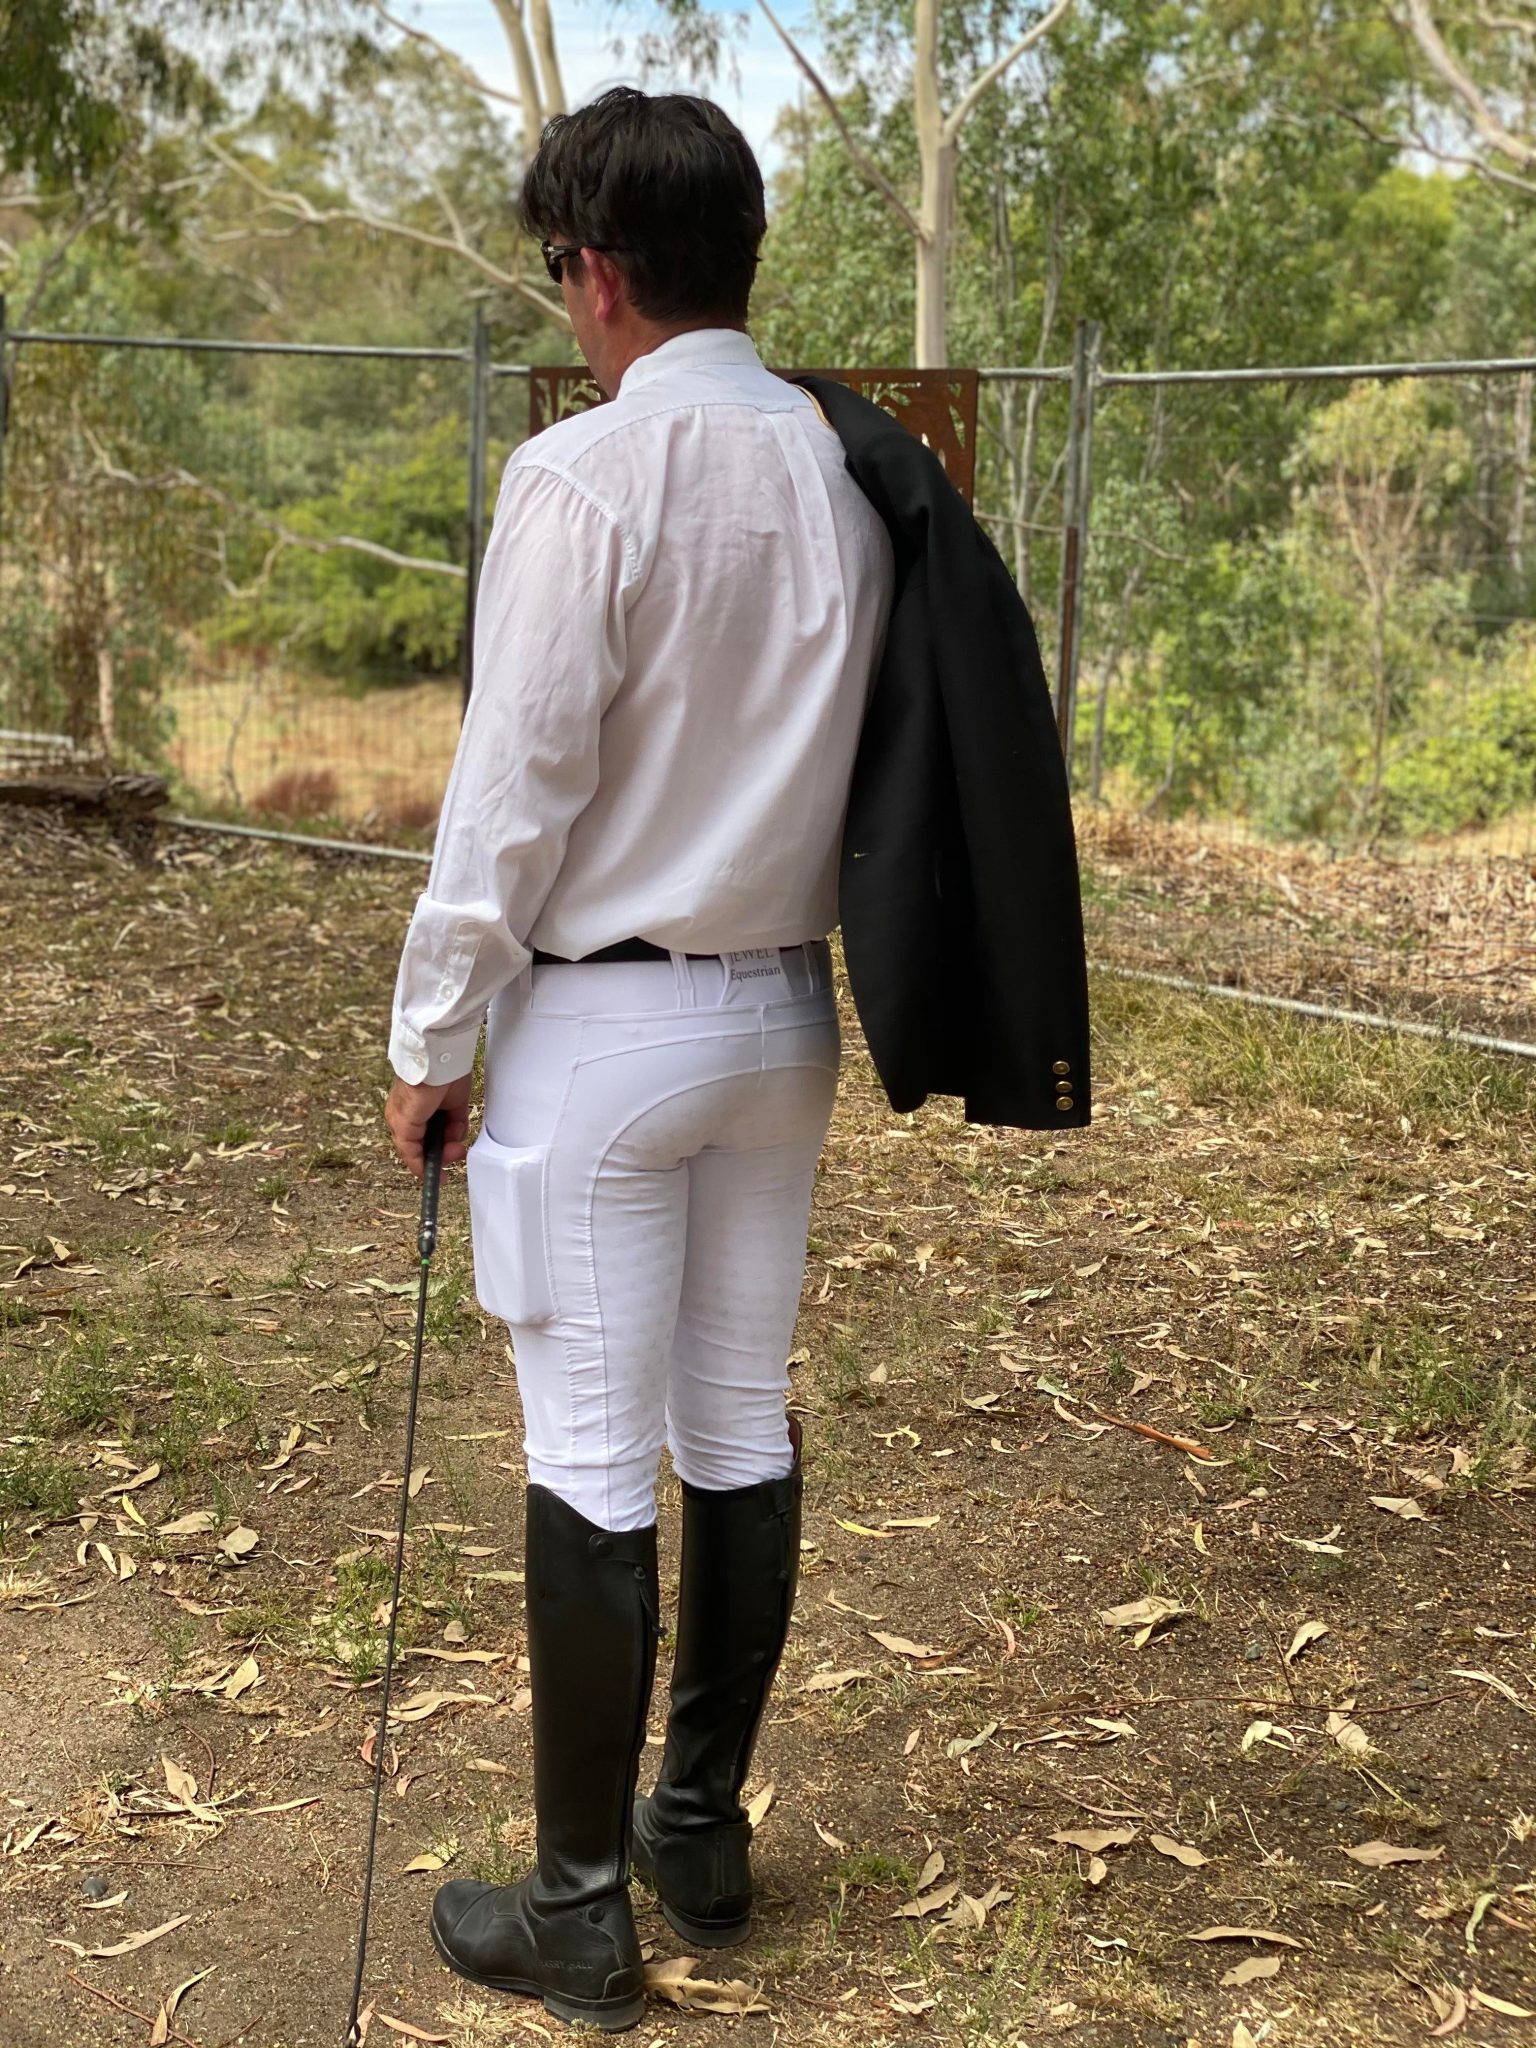 Jewel Equestrian Riding Tights - White Competition - Elegant Equine  Browbands & Accessories